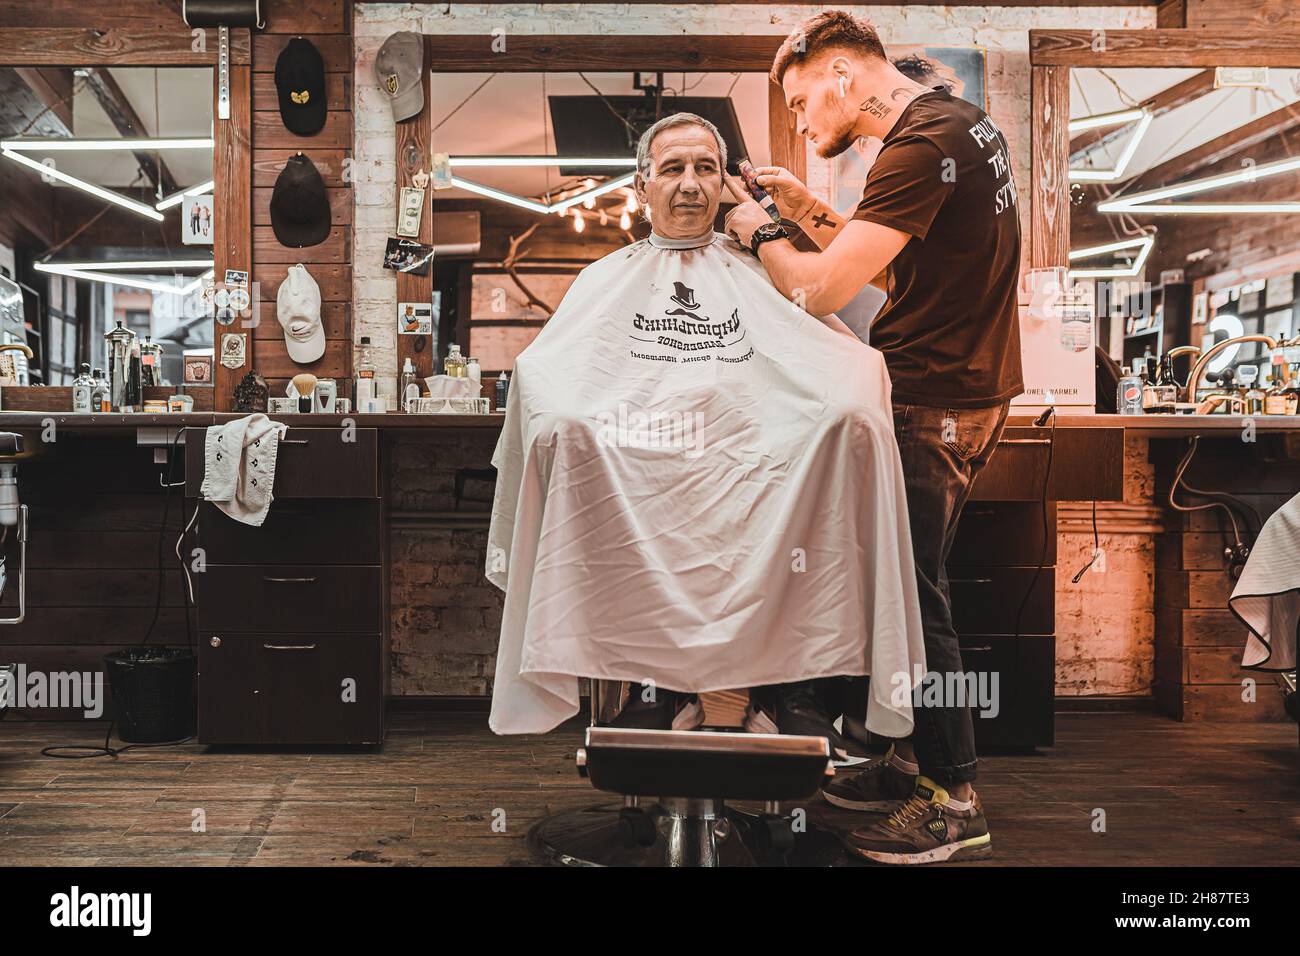 Barbershop. hairdresser professionally performs haircut for men. man client sits in professional barber chair, and hairdresser makes haircut. Stock Photo